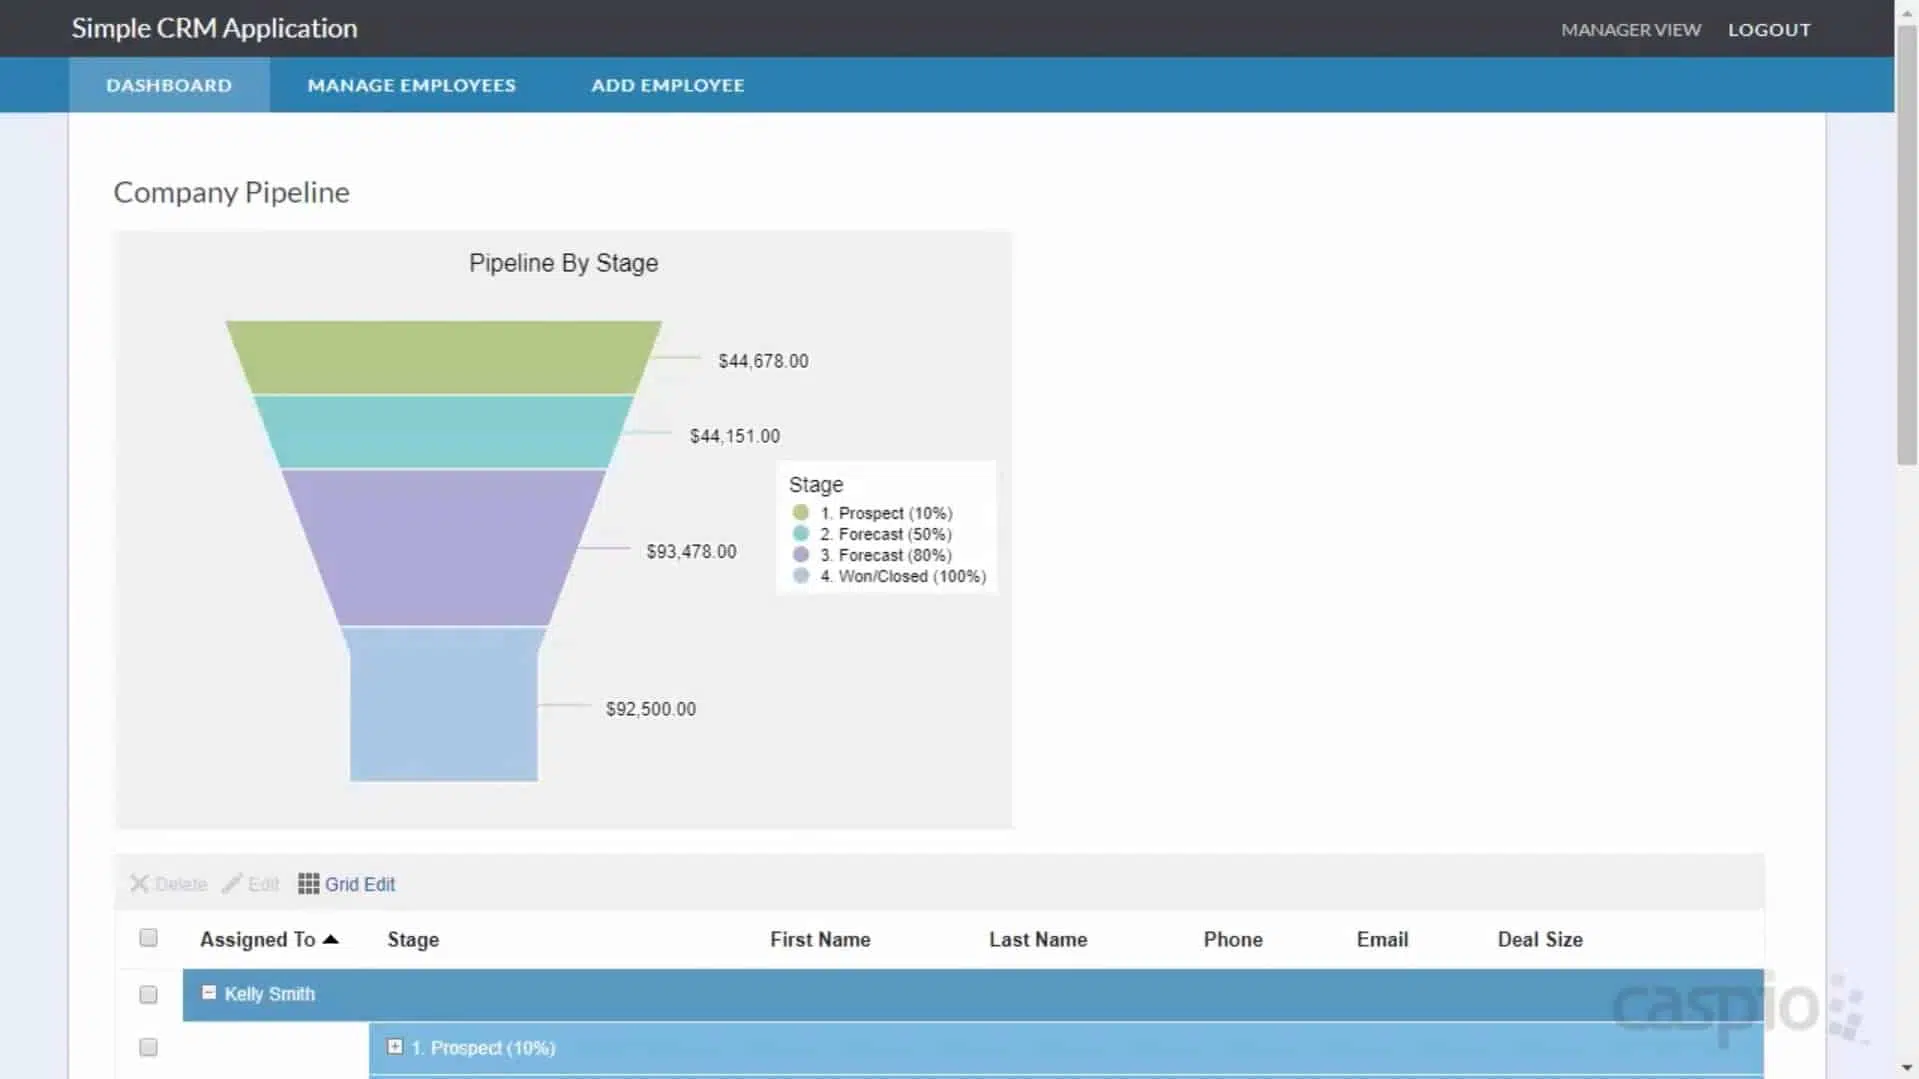 An image render showing a sample CRM app. It depicts an interface in the Manager view, showing “Dashboard”.